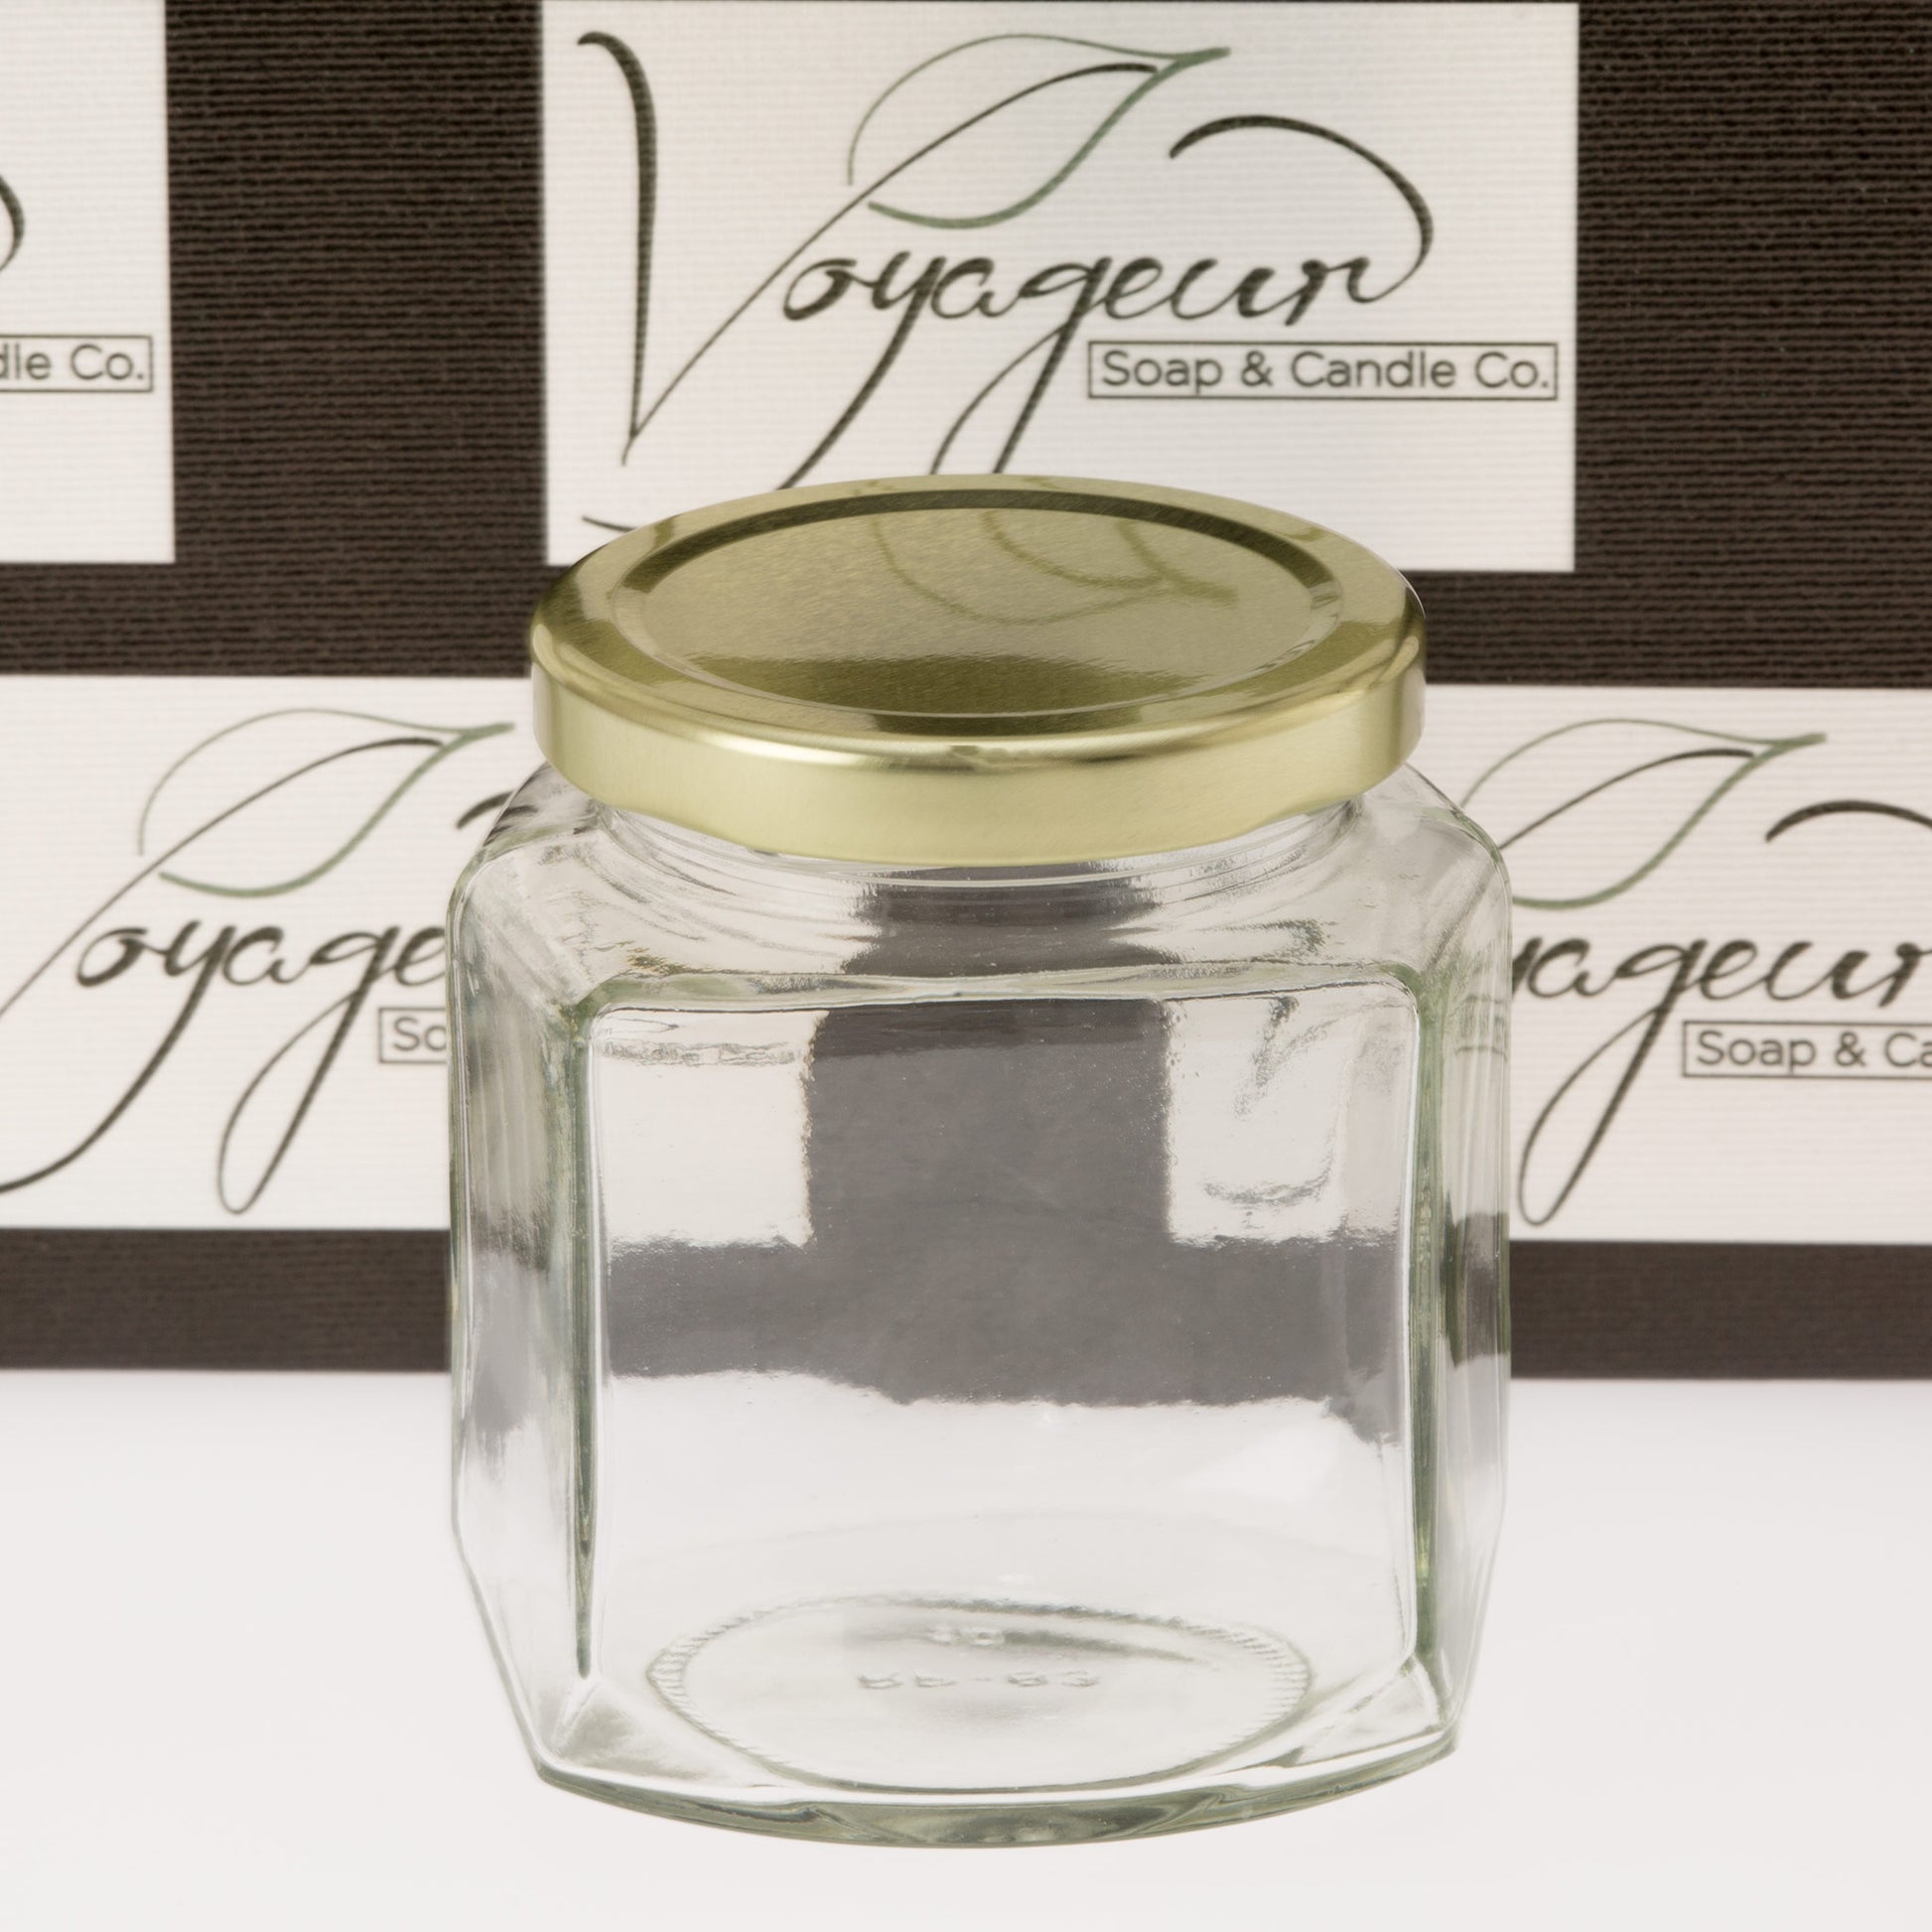 Oval Hexagon Jar with Gold Lid - 9 oz